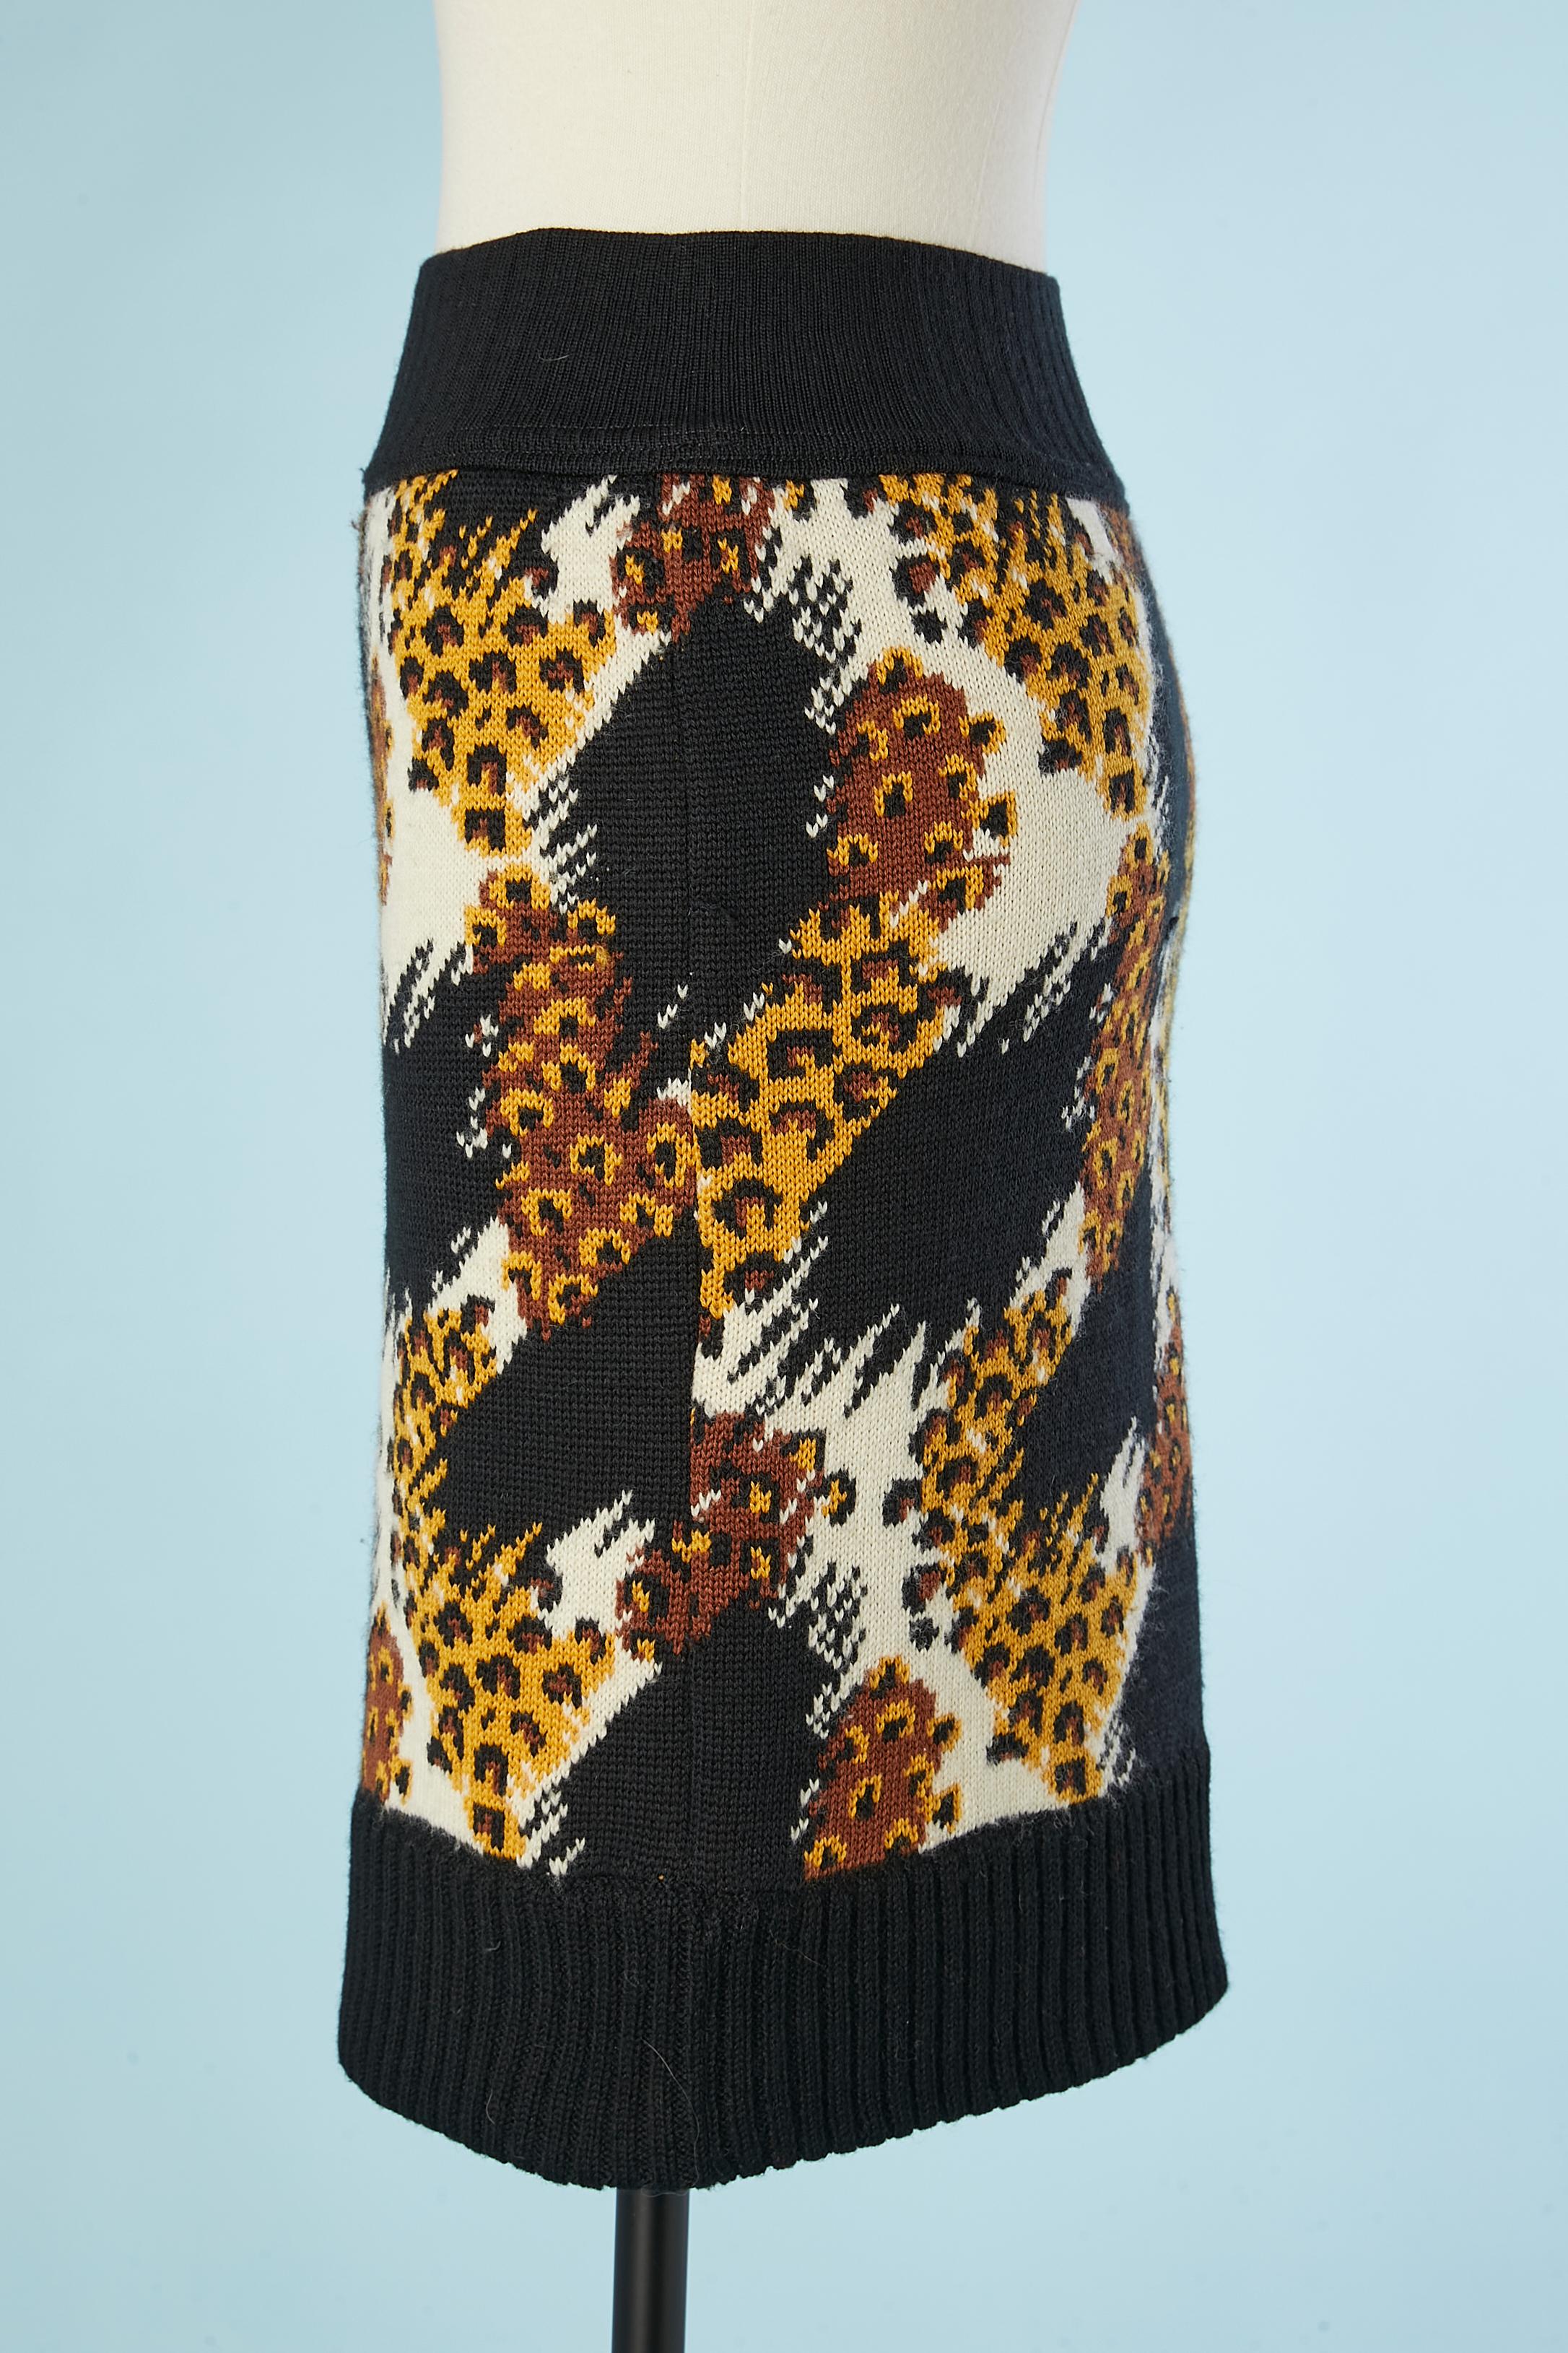 Knit wool jacquard skirt with animal pattern Yves Saint Laurent Rive Gauche  In Excellent Condition For Sale In Saint-Ouen-Sur-Seine, FR